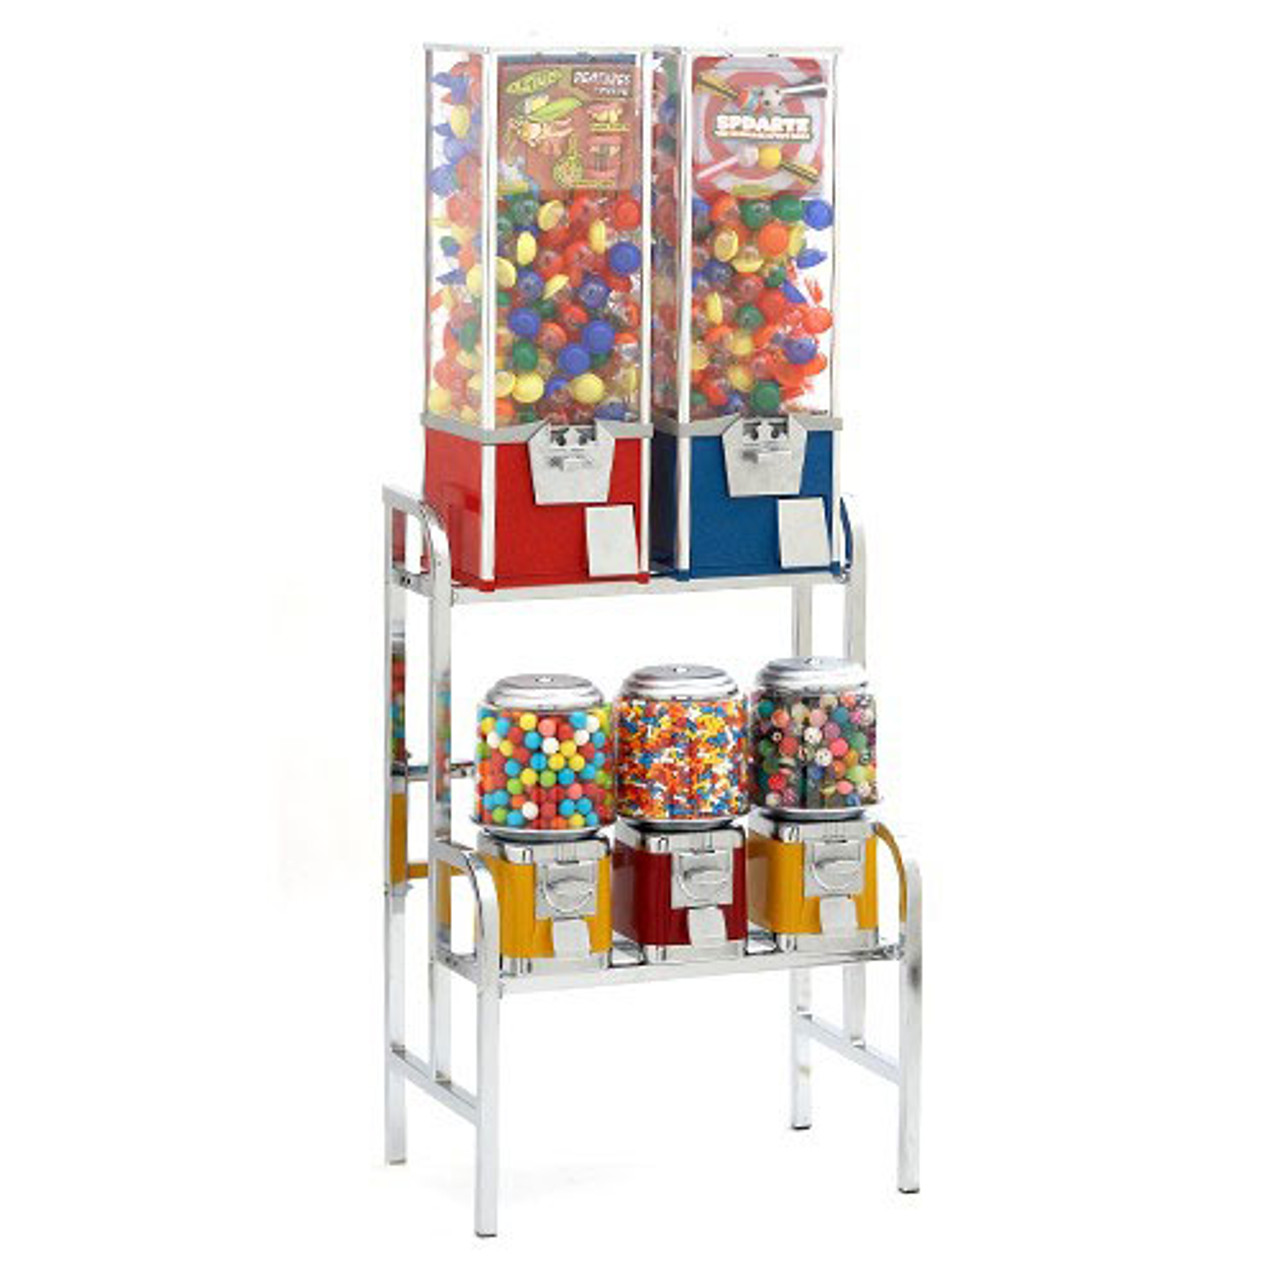 Solid White Vending Gumballs (1-inch /850 ct)